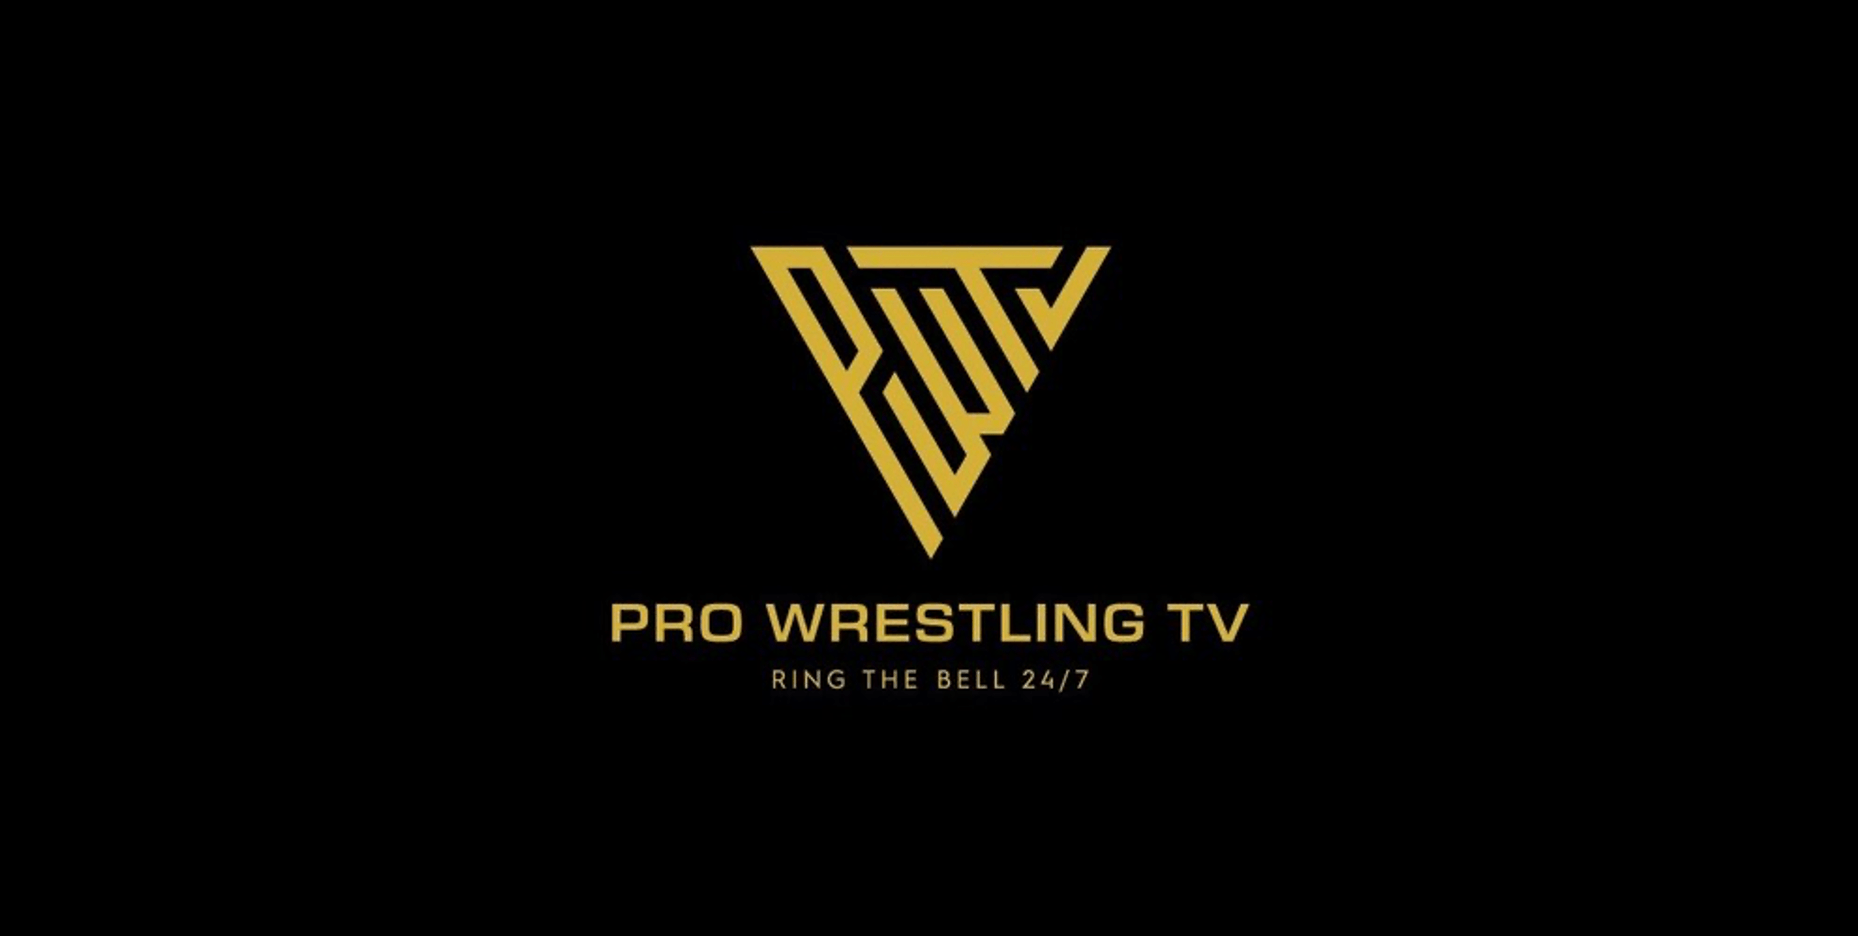 Ad-Supported Pro Wrestling TV (PWTV) to Launch on the Heels of Wrestlemania Weekend